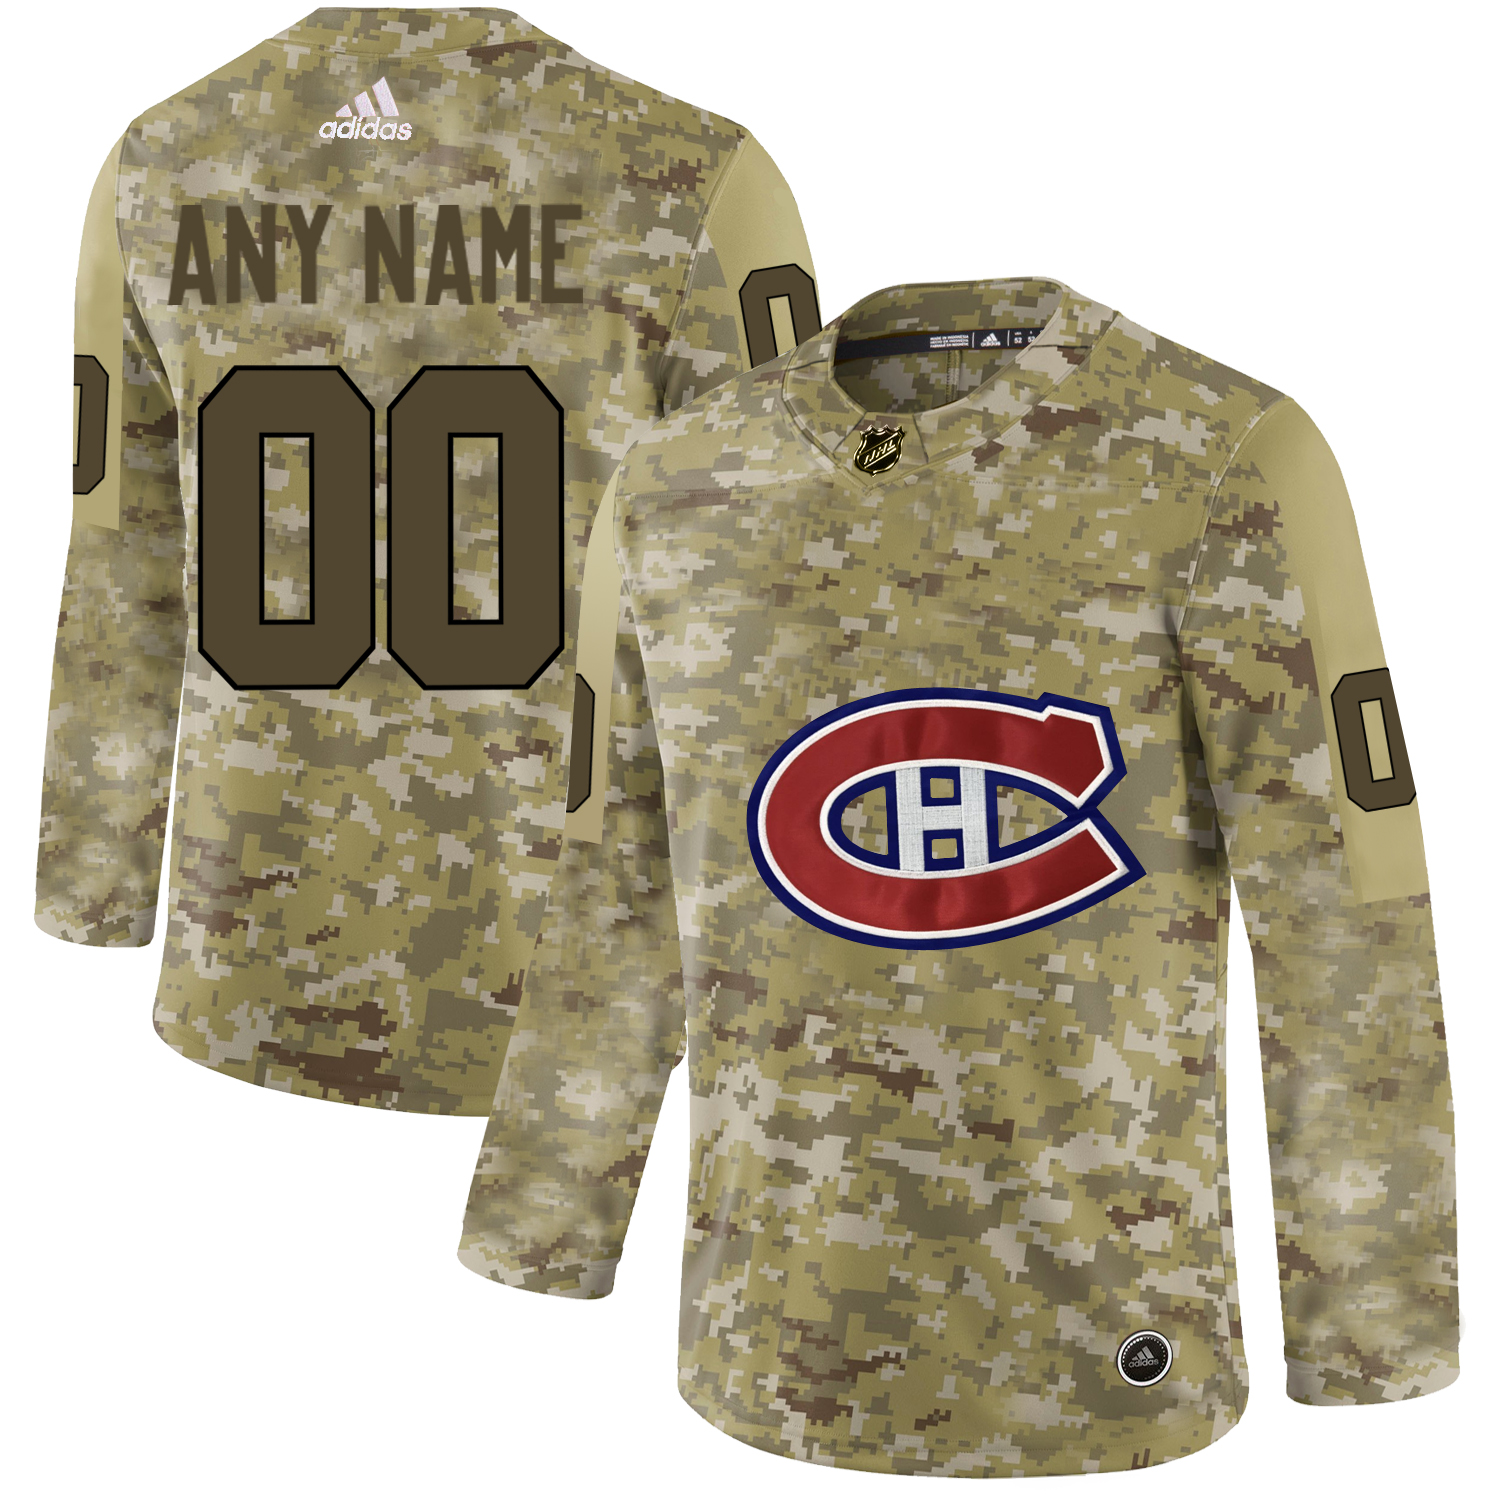 Men's Adidas Canadiens Personalized Camo Authentic NHL Jersey